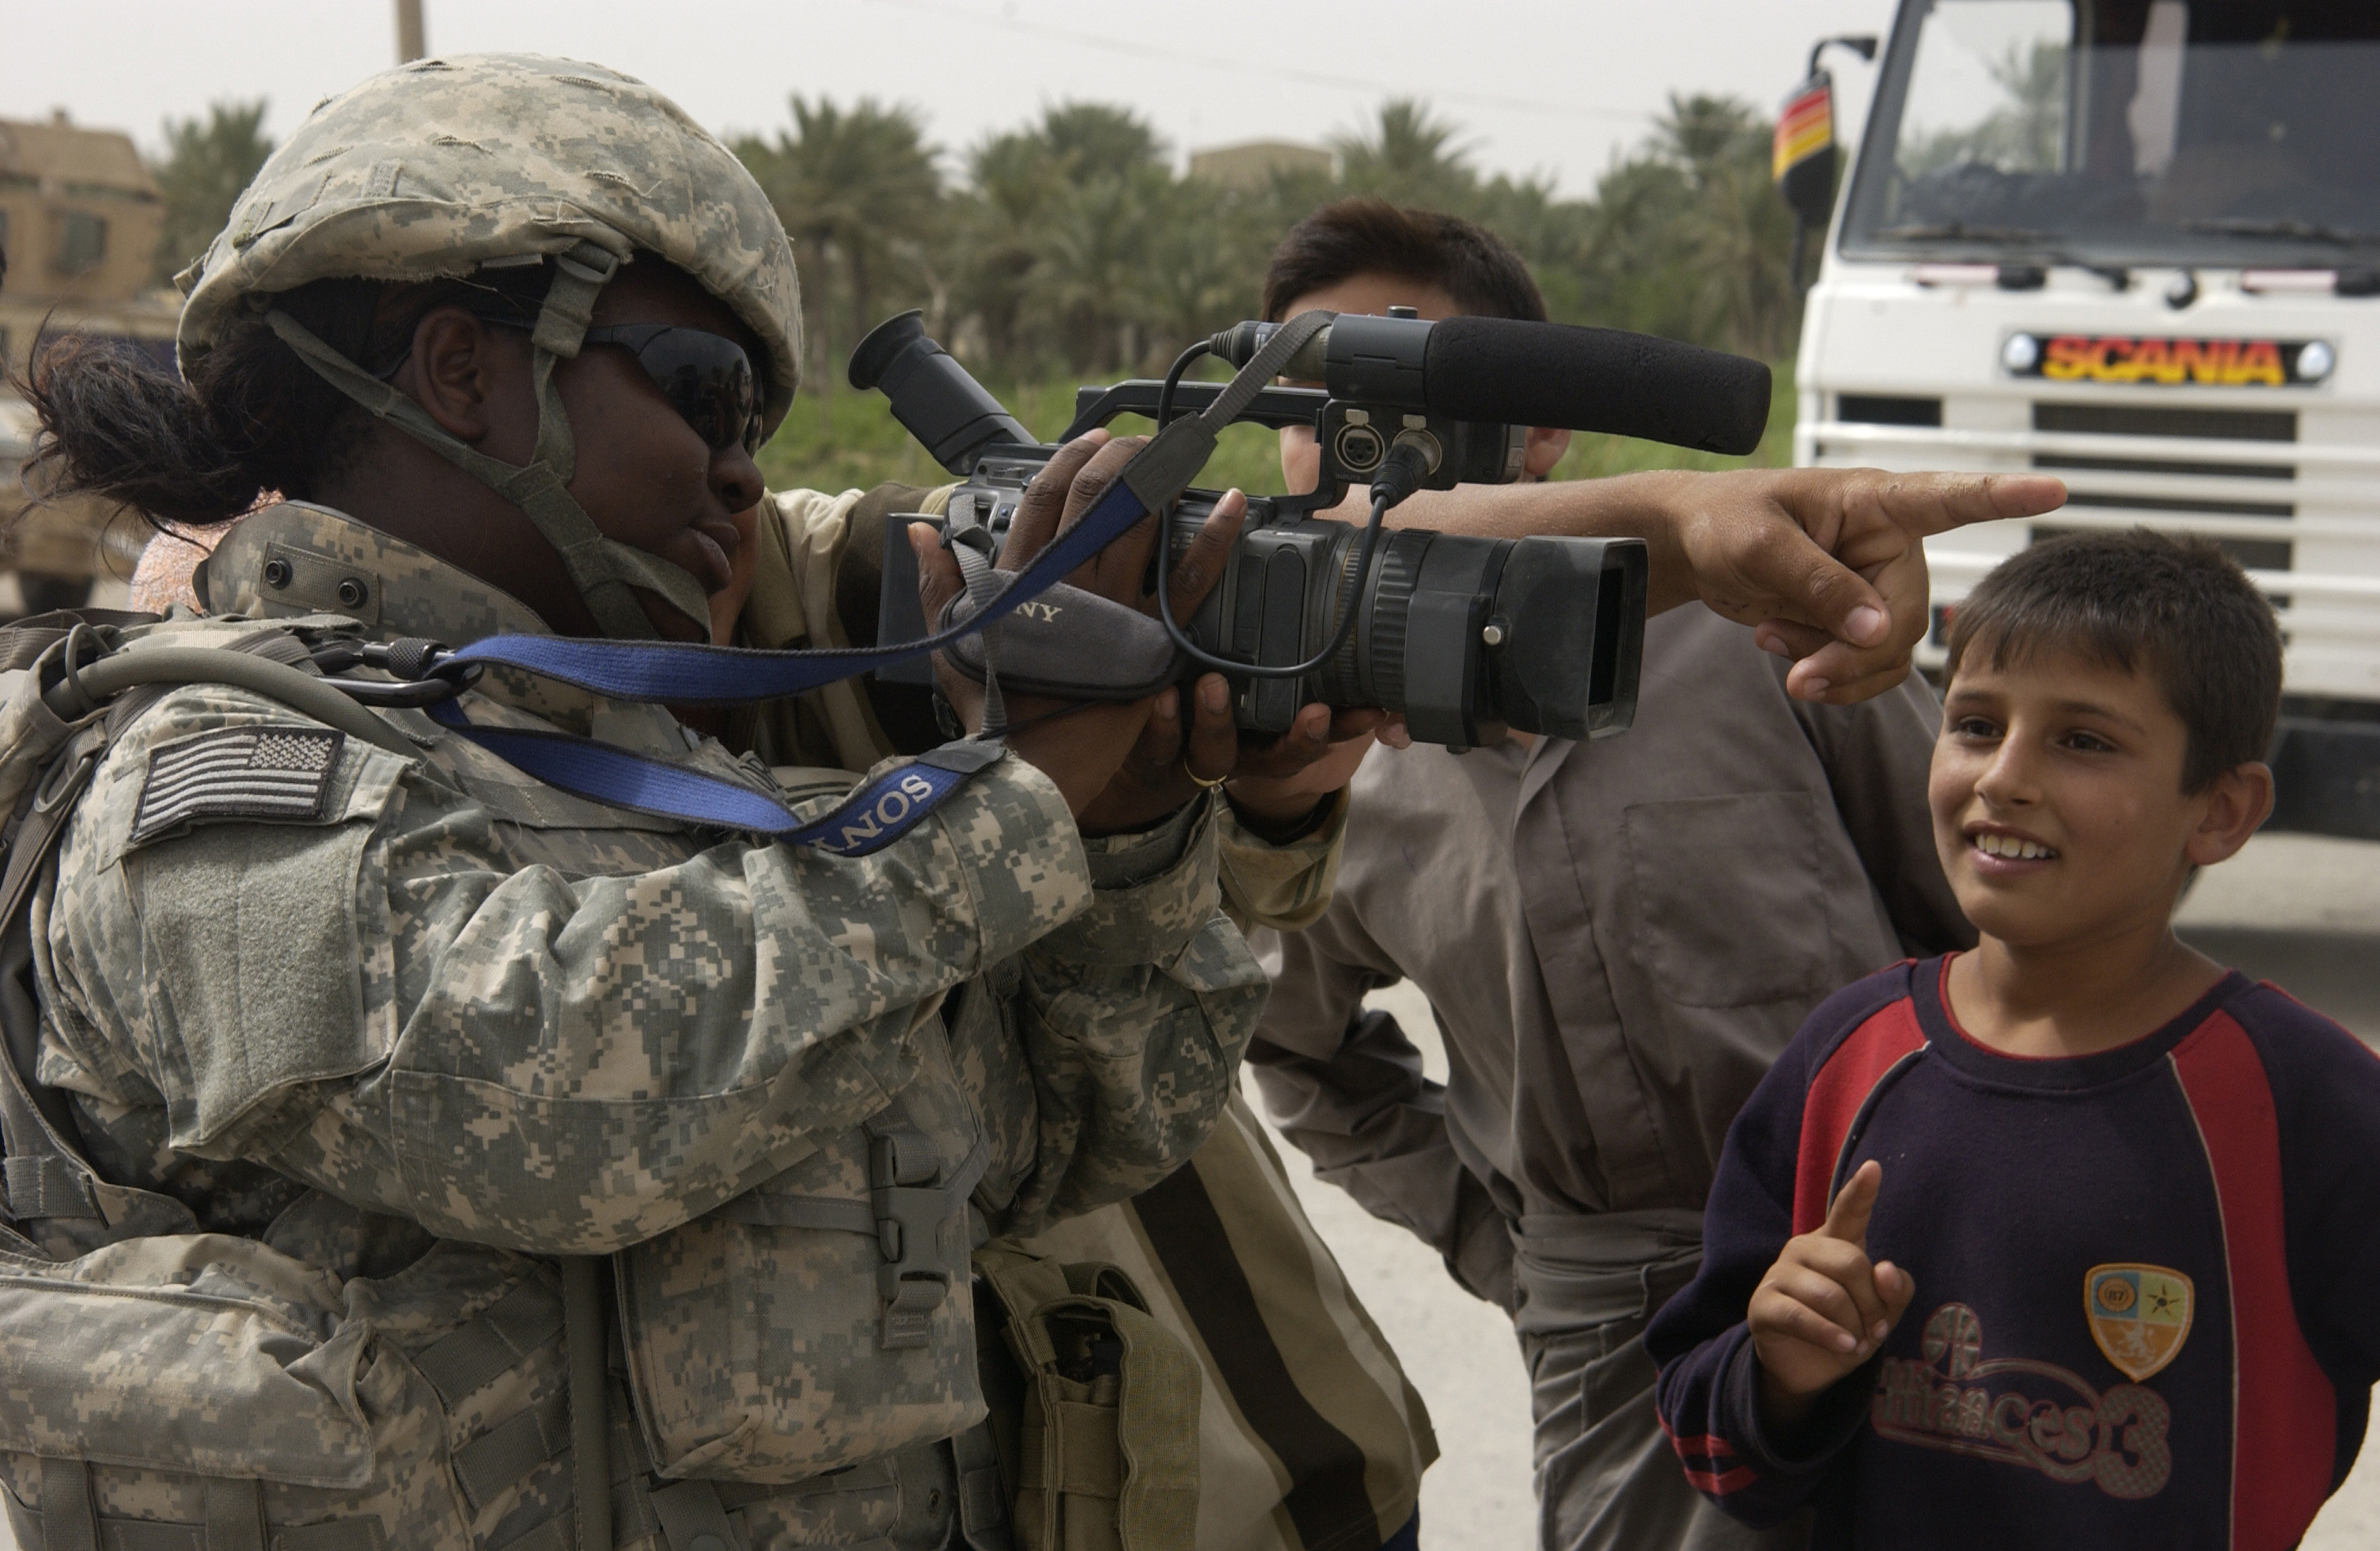 U.S. Air Force SrA Chalanda Roberts of, Joint Combat Camera, shows iraqi children what she see's through the viewfinder of her video camera at a traffic control point located near Abusayda, Iraq on June 1 070601-F-AD344-077